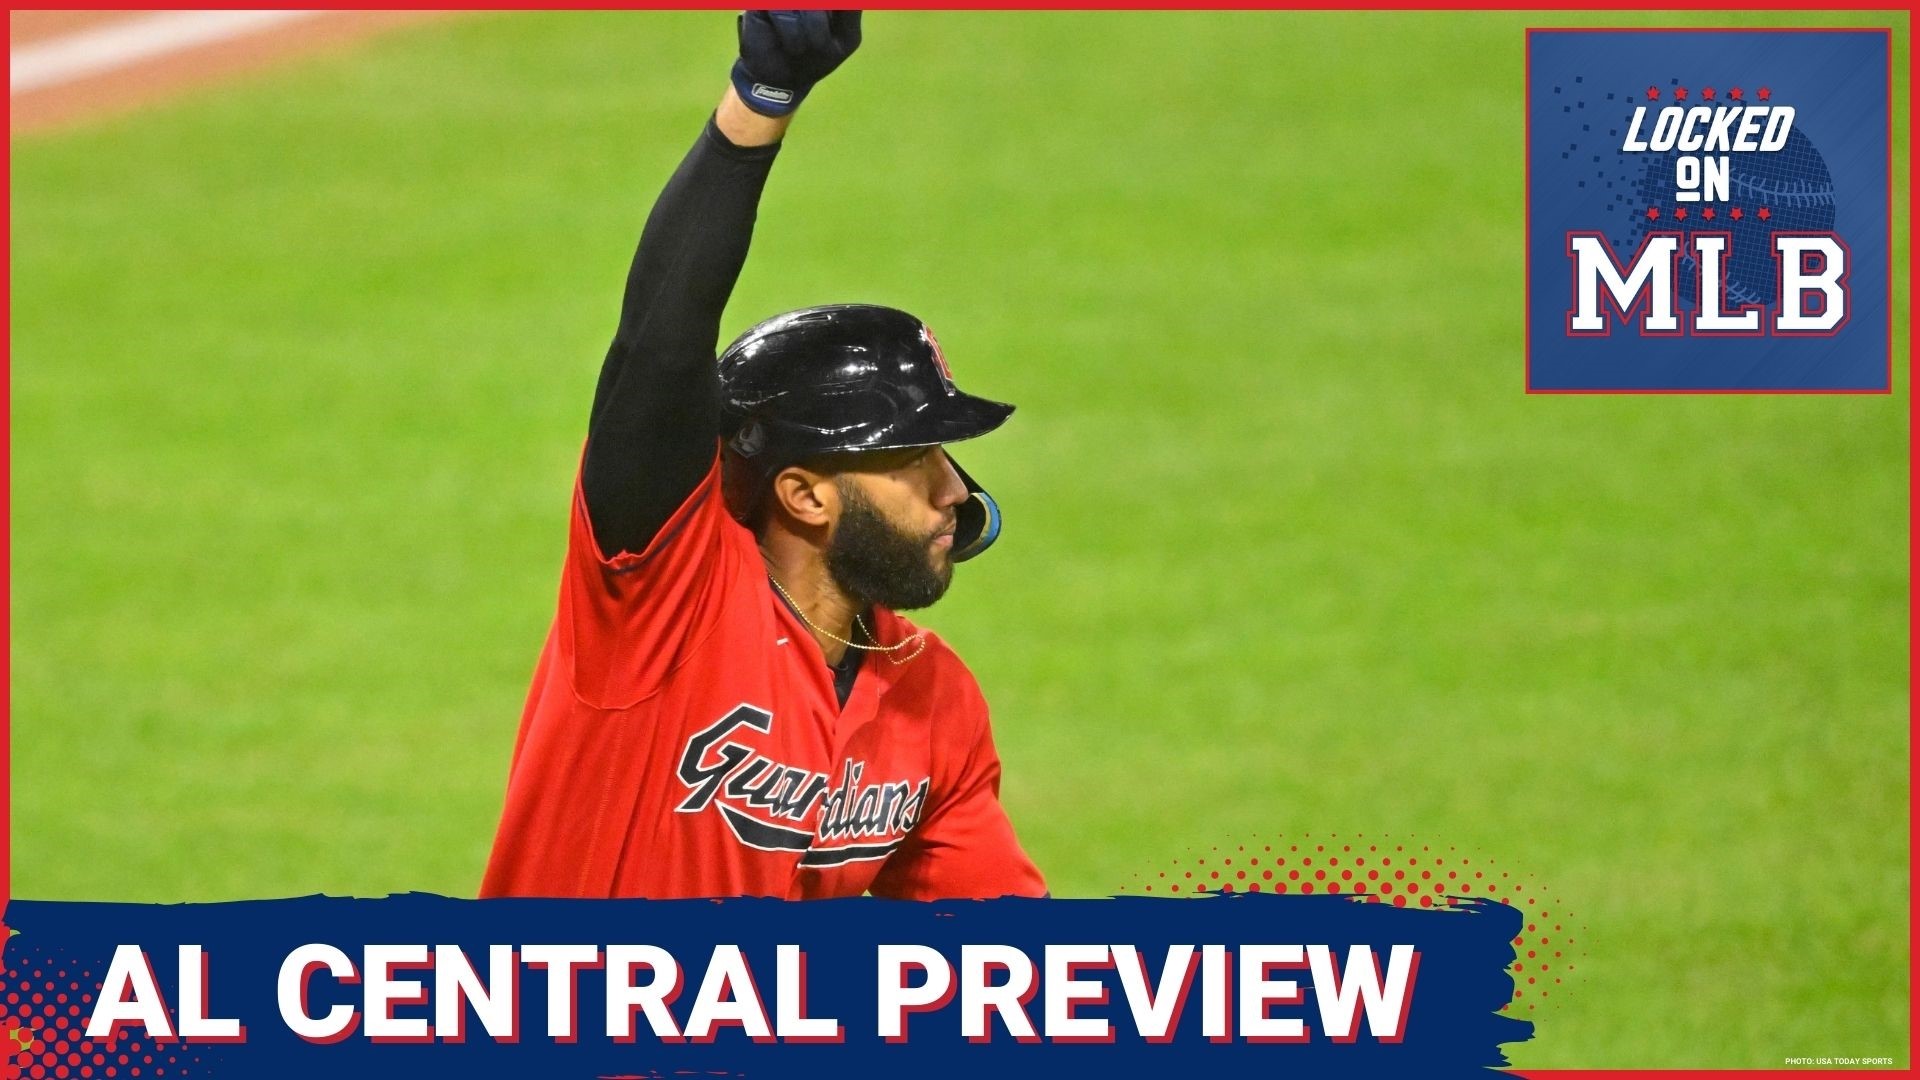 Locked on MLB Preview of AL Central fox61